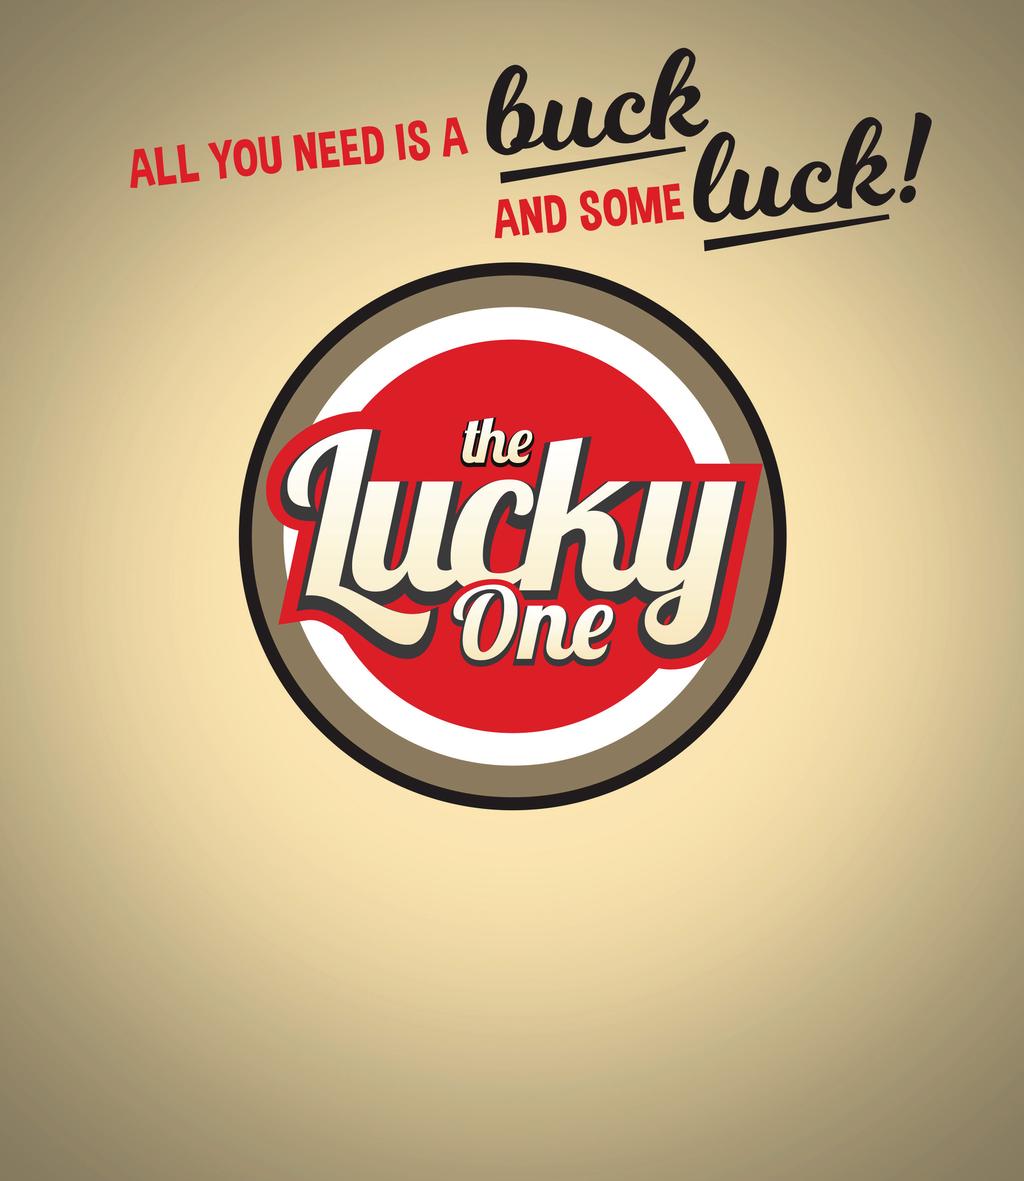 TICKET SELLER The Official Magazine for Ohio Lottery Retailers Vol. 2 No. 87 January 2018 NEW from the Ohio Lottery! Play The Lucky One every 4 minutes between KENO drawings.